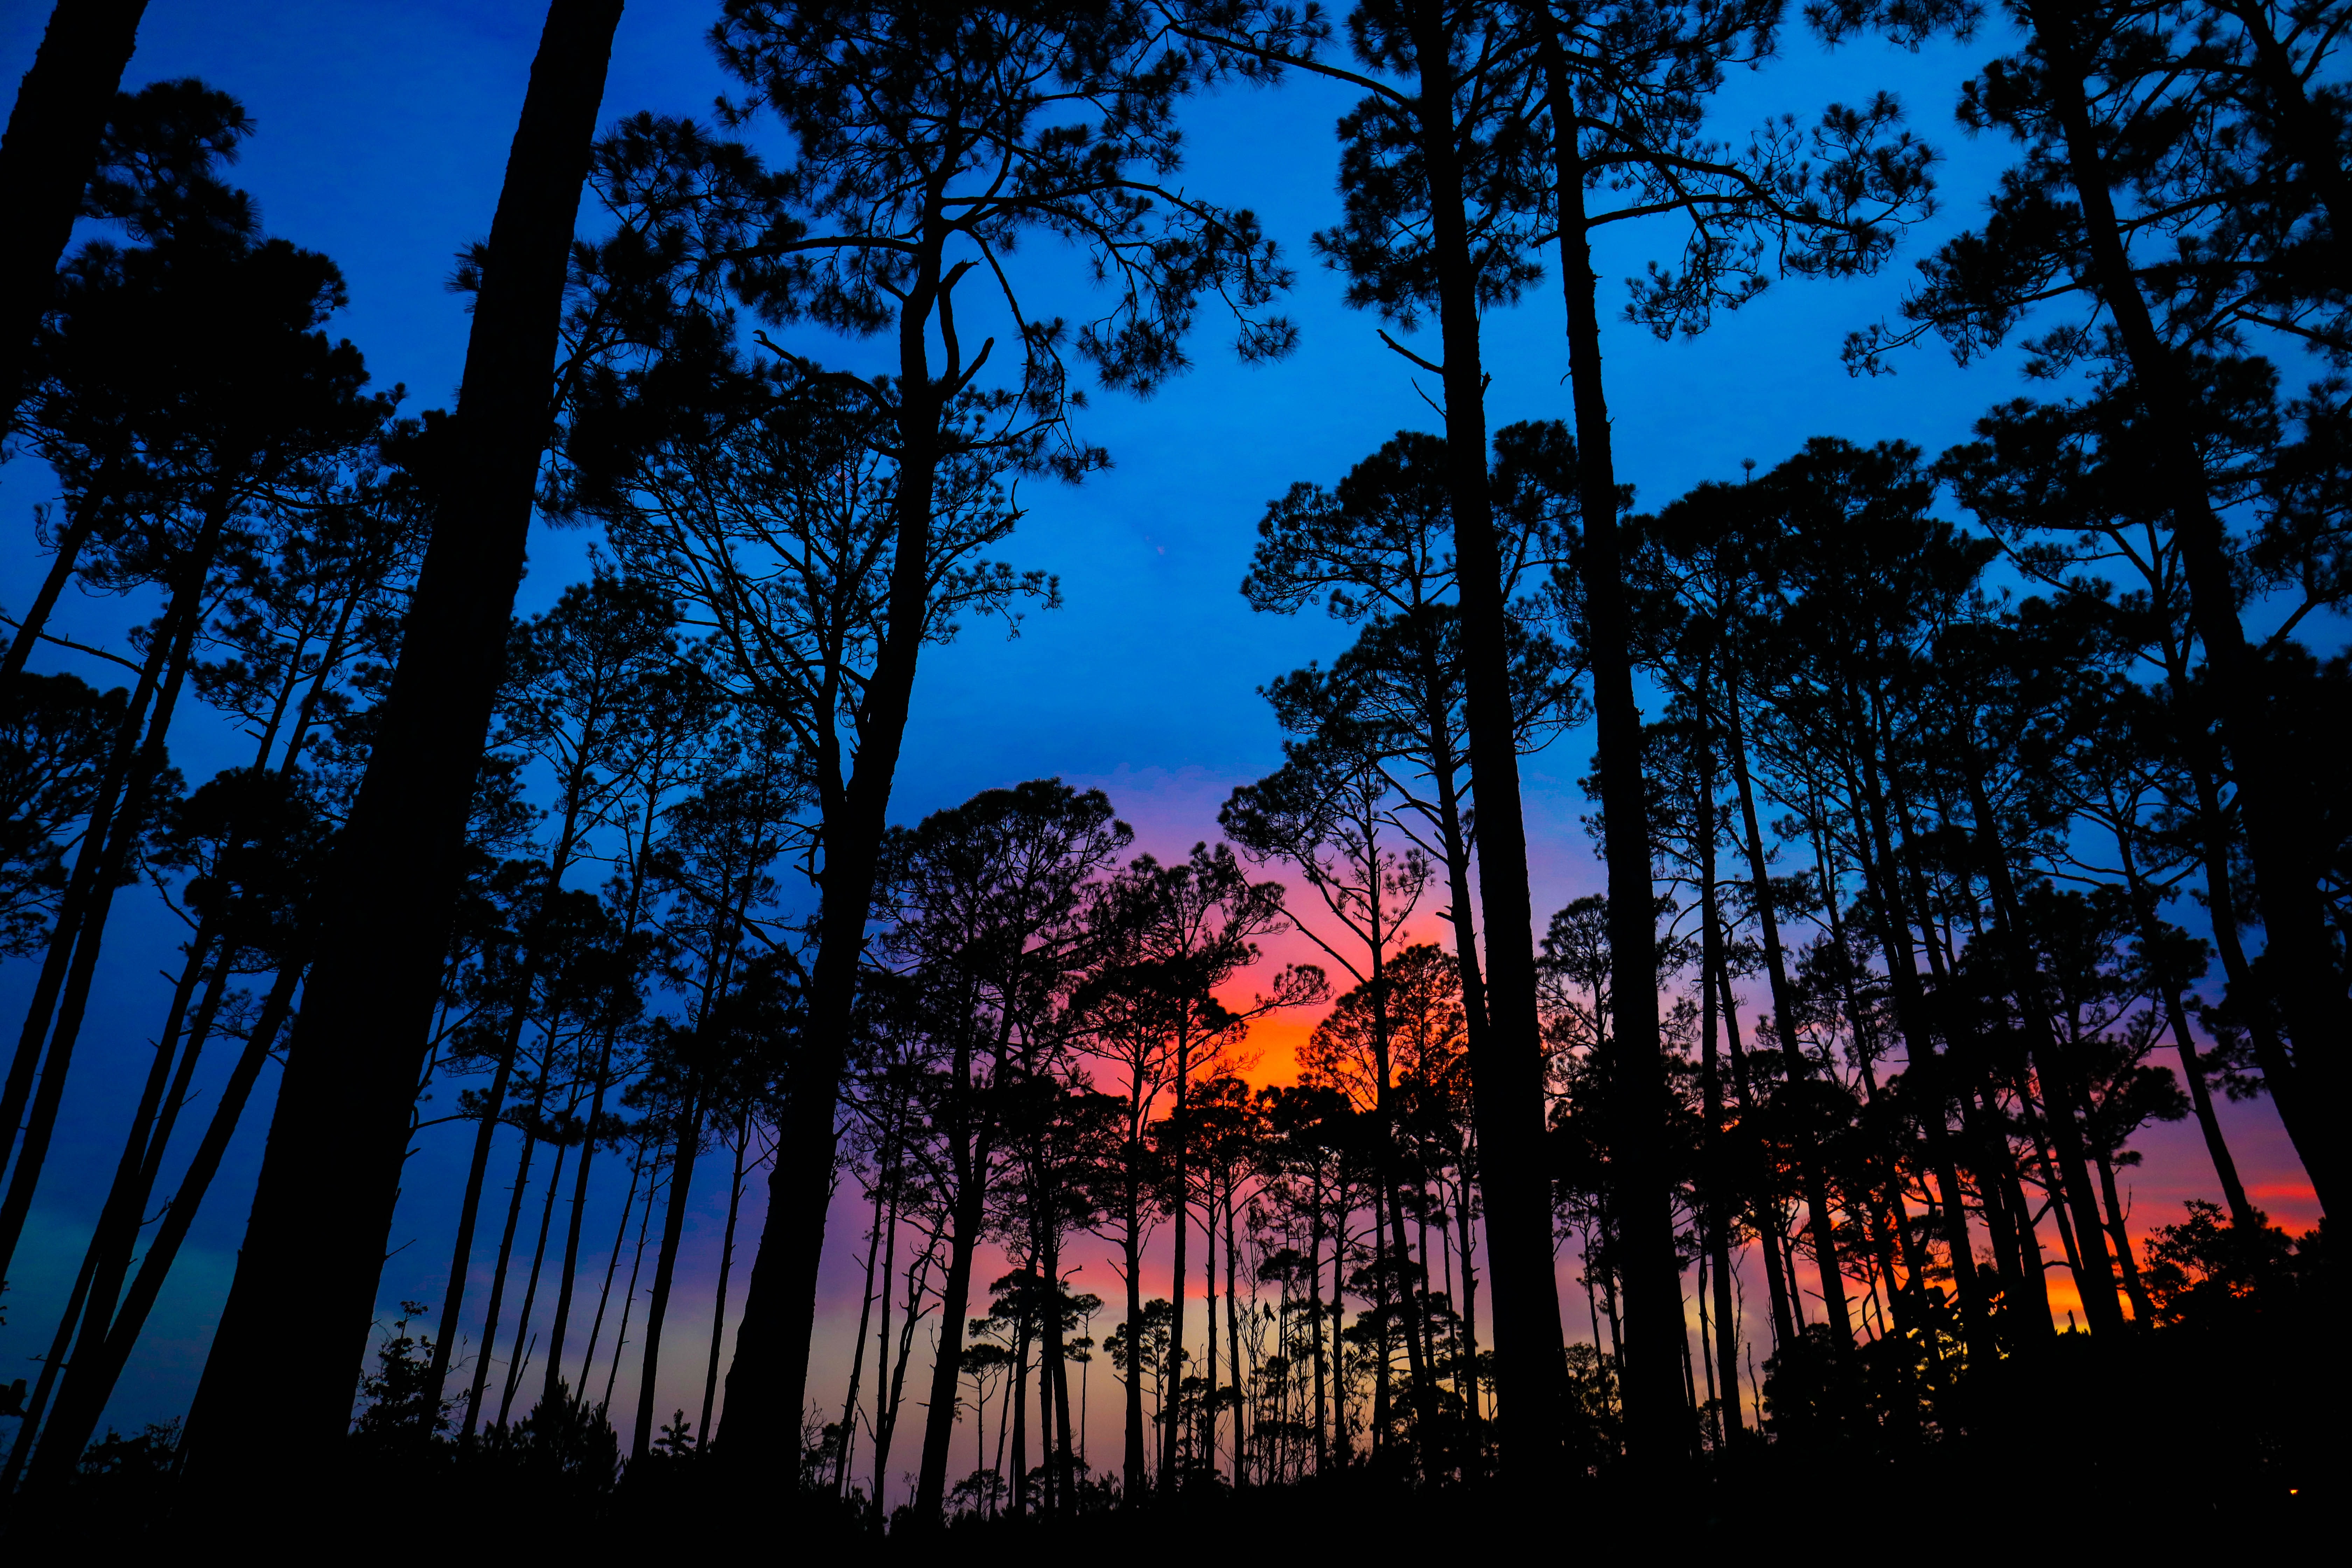 trees turn black against a blue and red sky as the sun sets